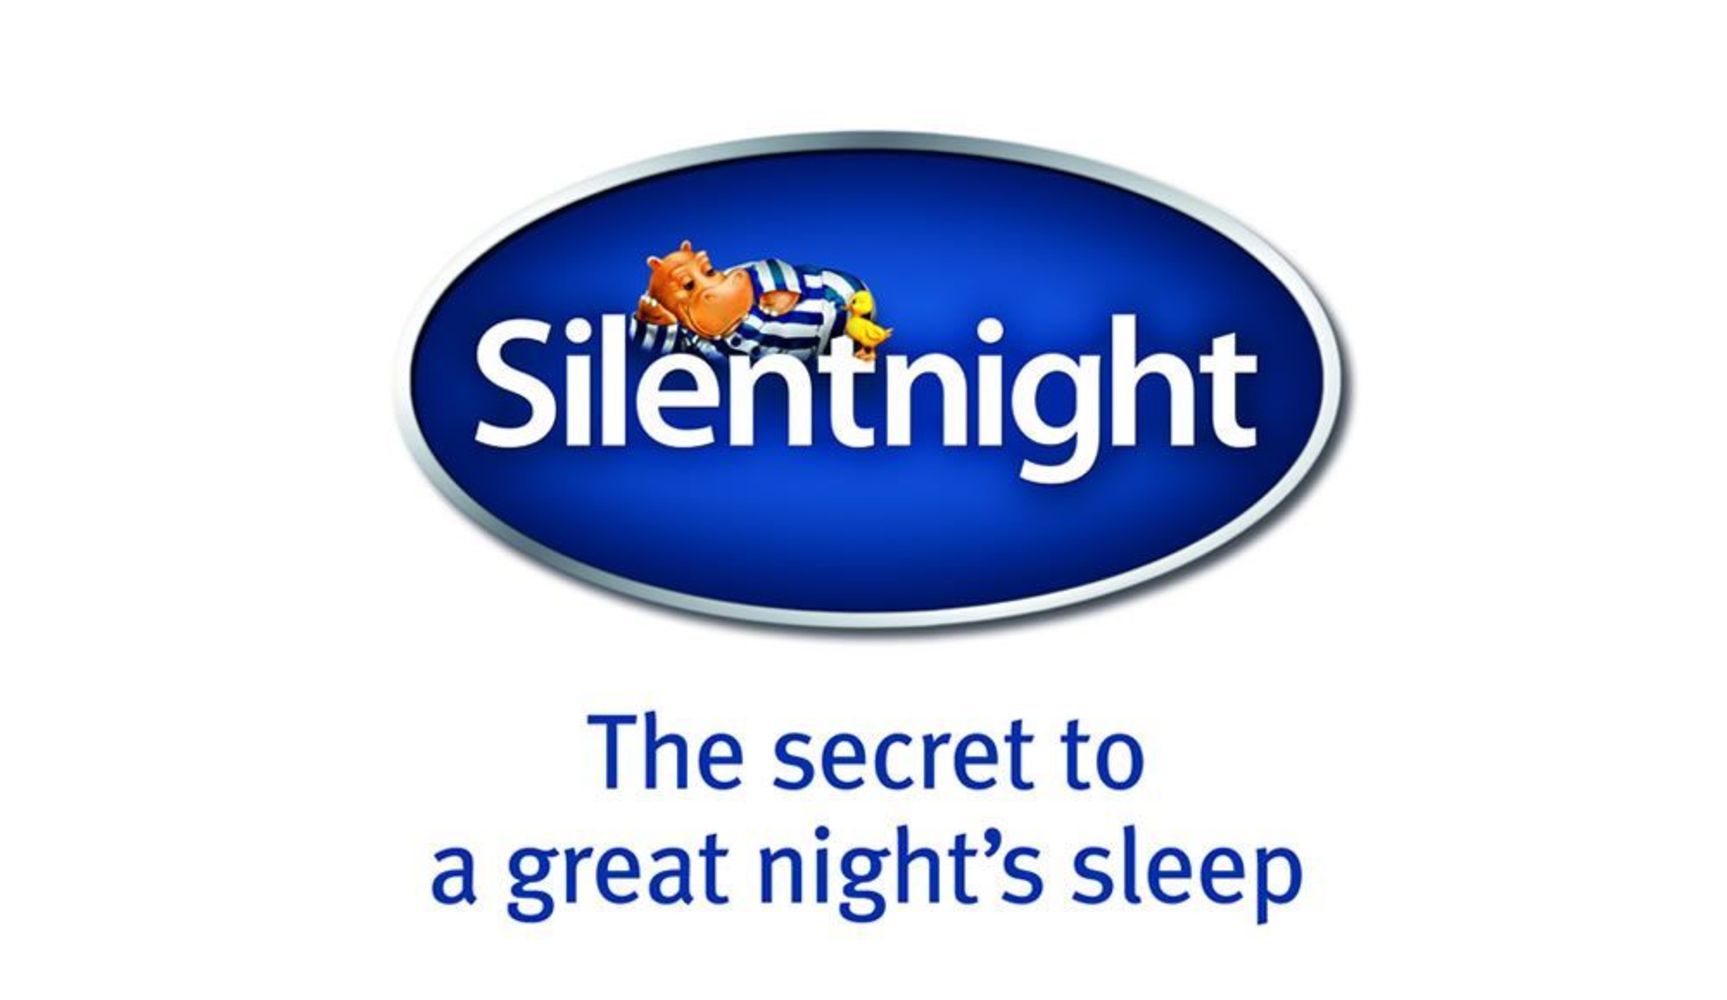 Bedding Auction containing; wide range of branded duvets and pillows from Silent Night, bulk and single lots!